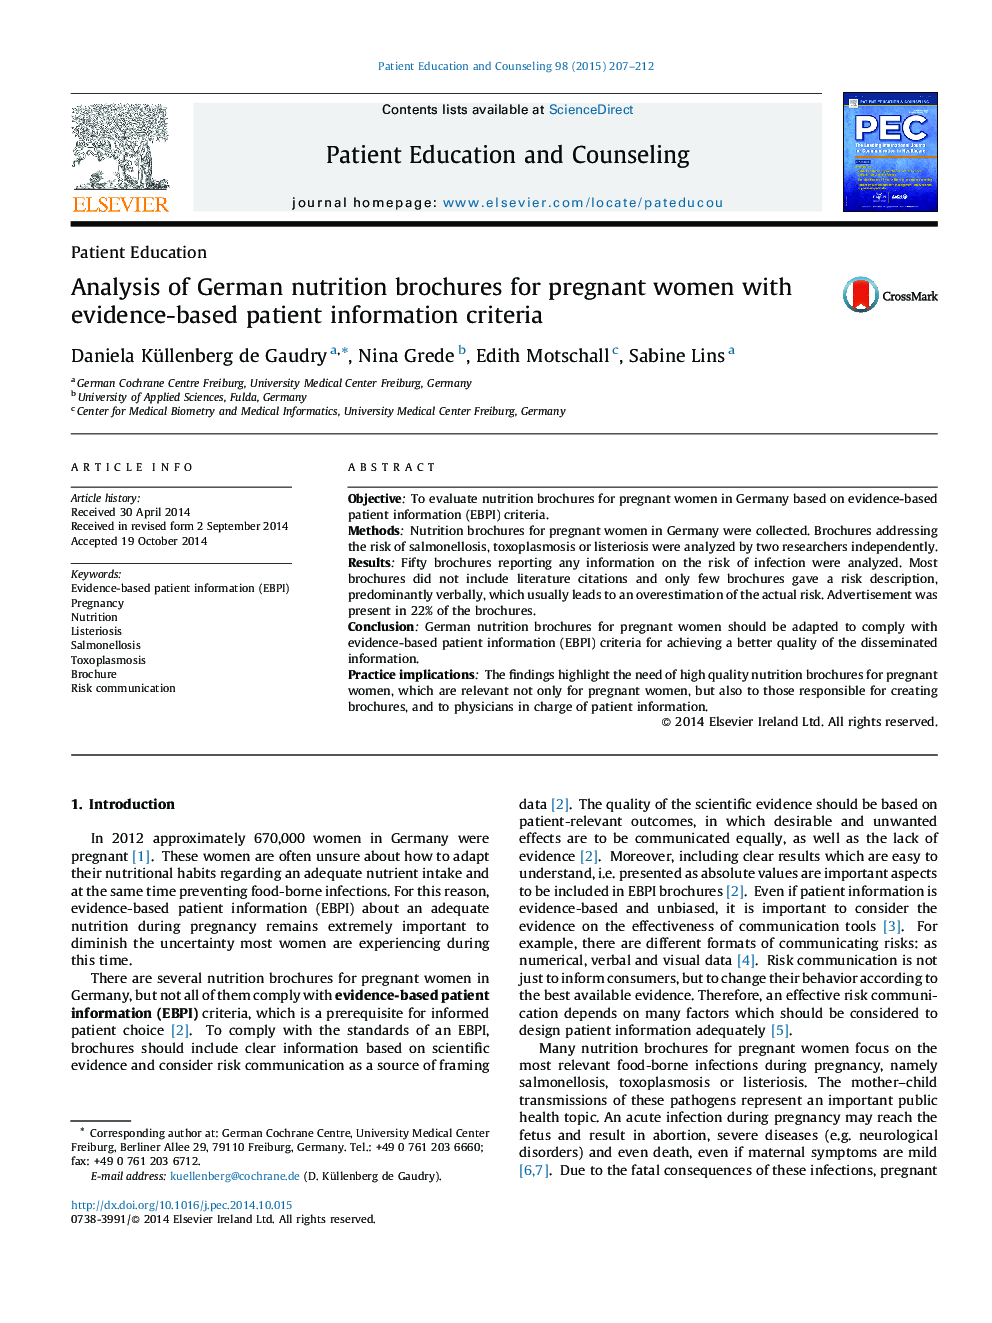 Analysis of German nutrition brochures for pregnant women with evidence-based patient information criteria